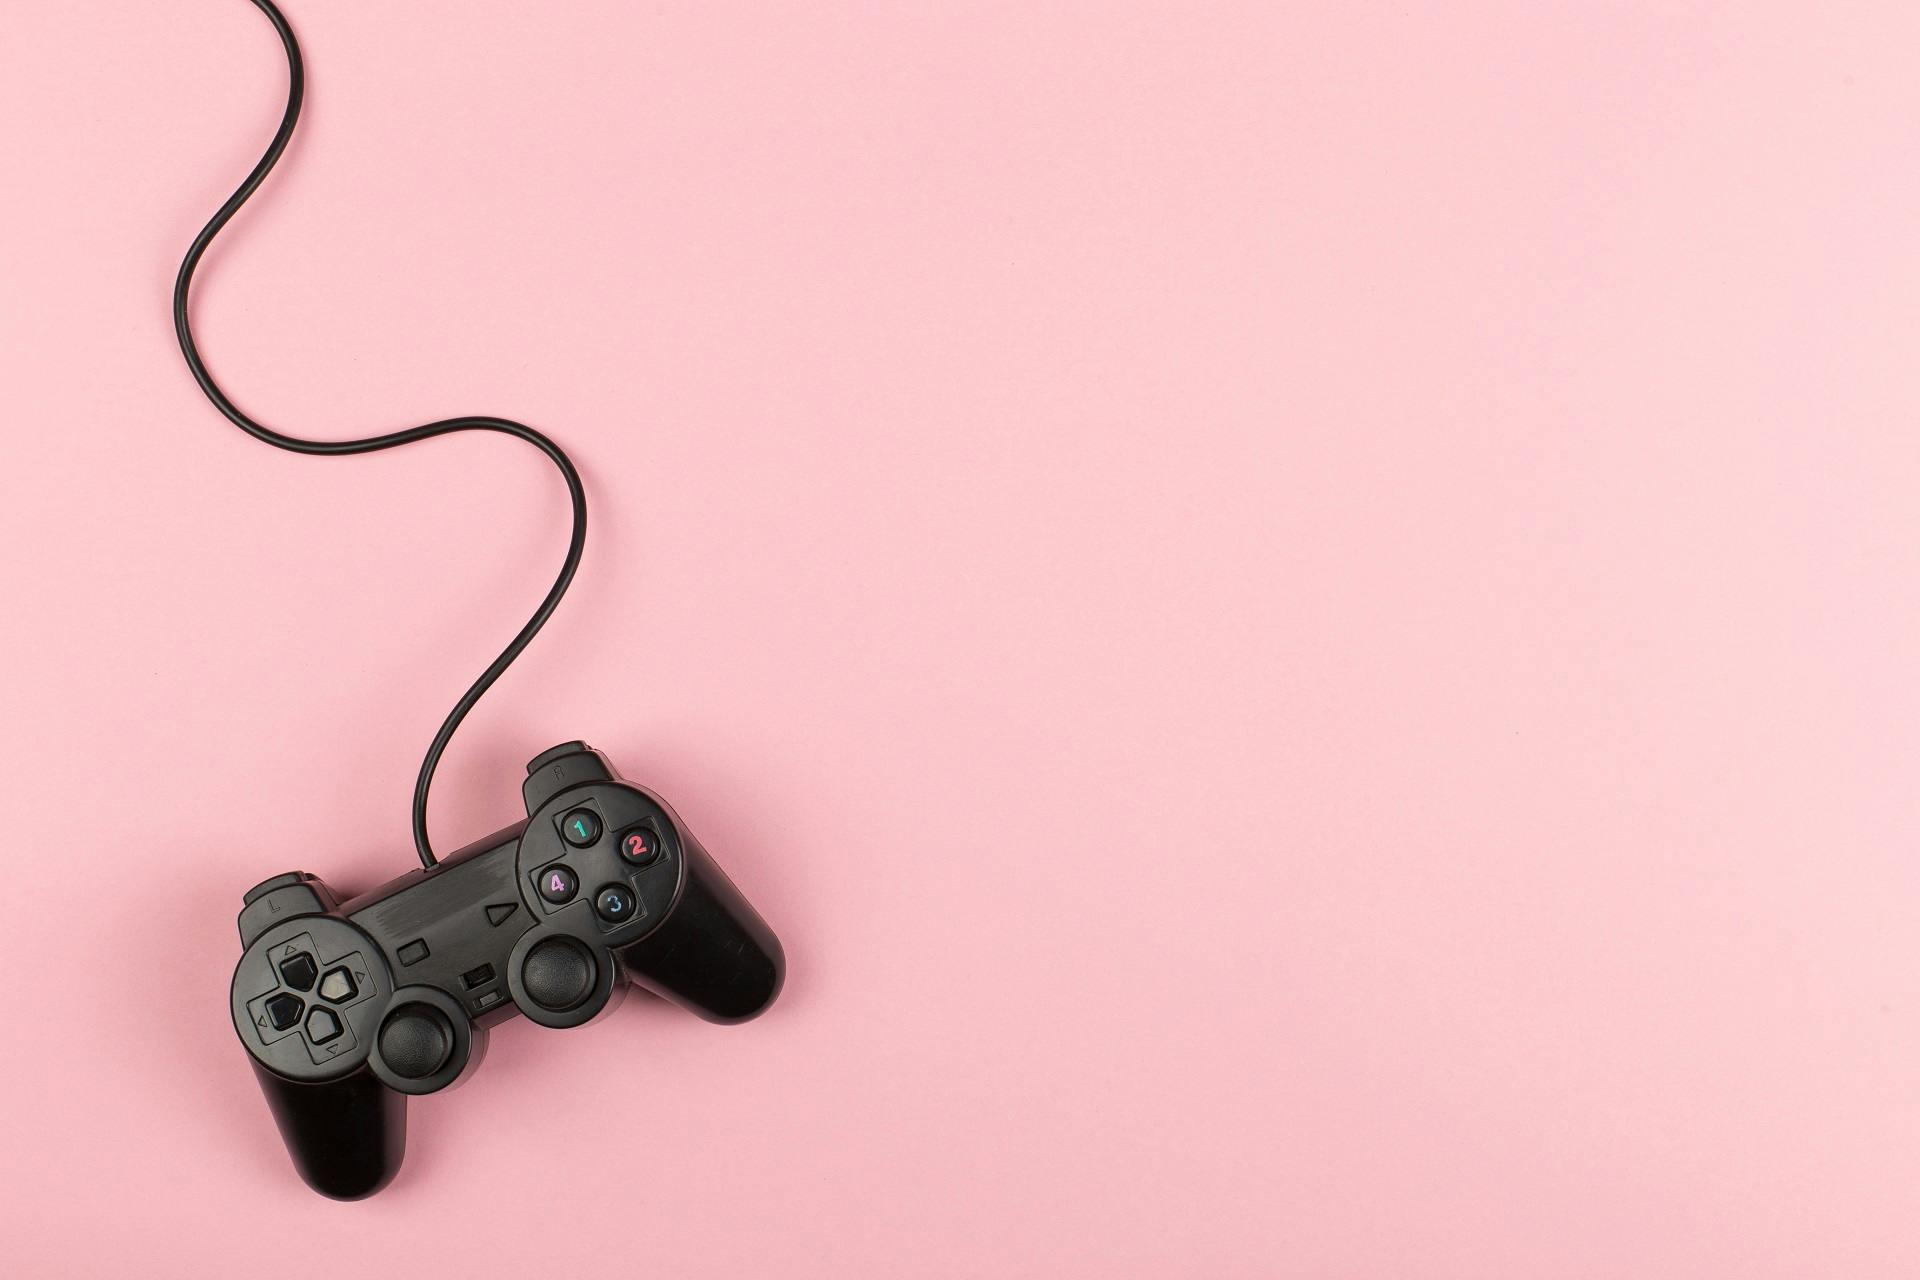 Picture of a game controller on pink background